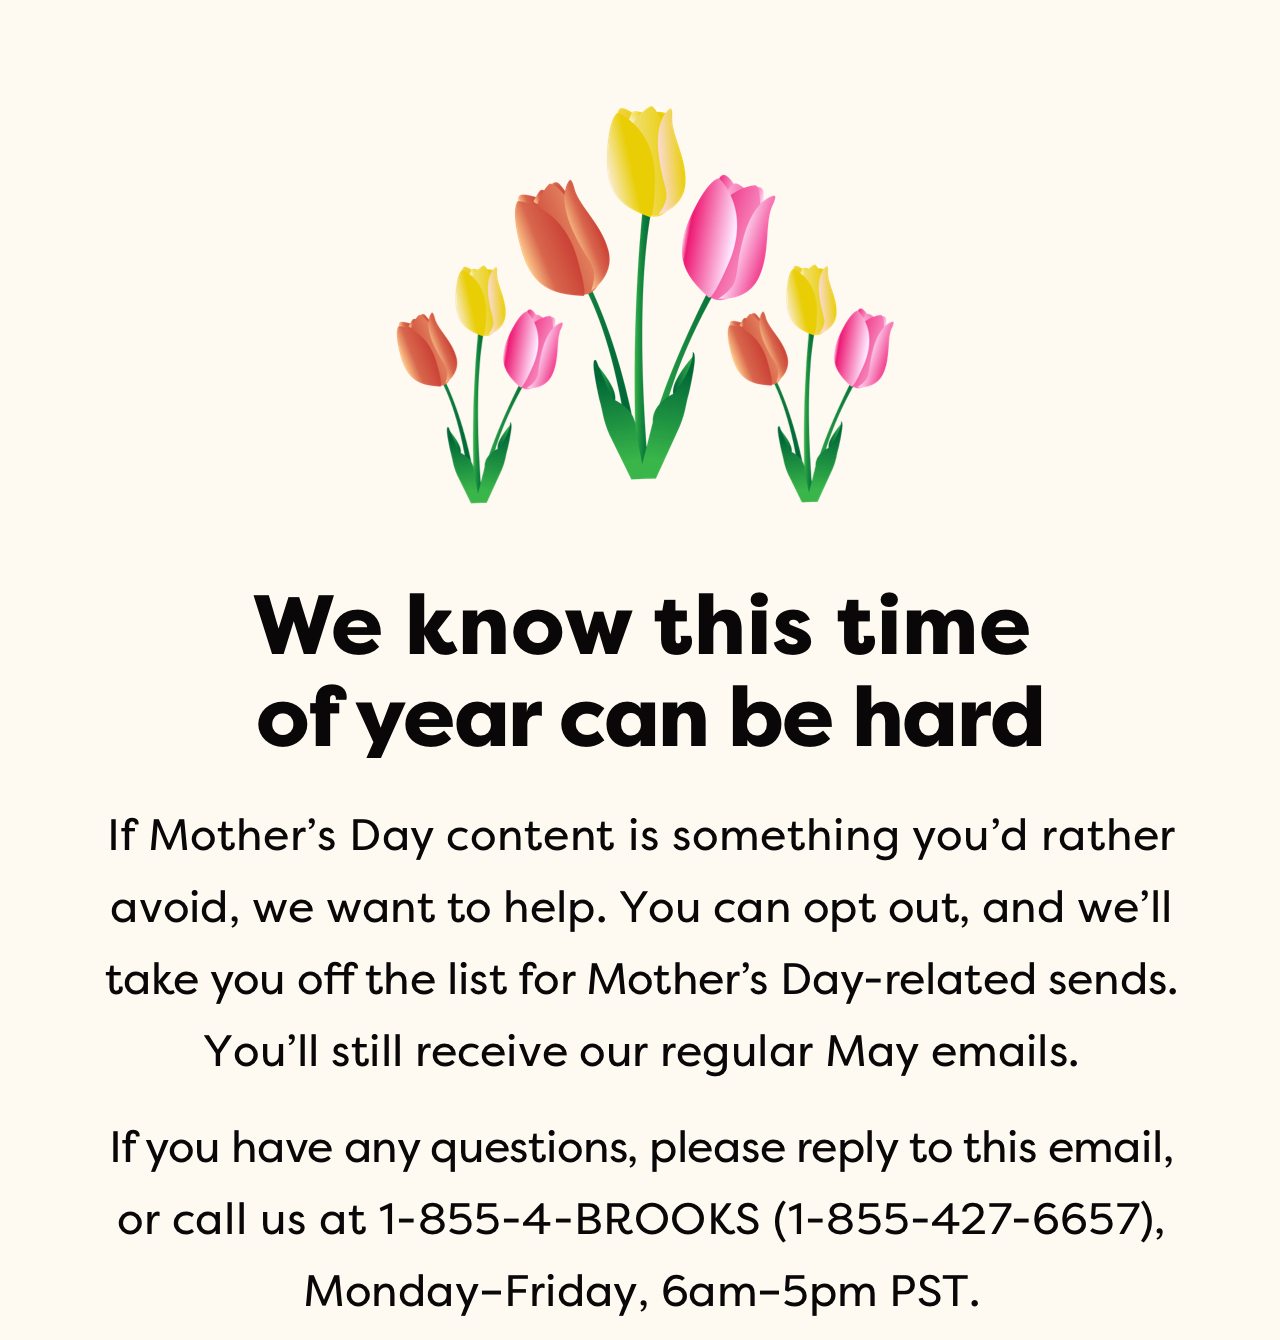 We know this time of year can be hard | If Mother's Day content is something you'd rather avoid, we want to help. You can opt out, and we'll take you off the list for Mother's Day-related sends. You'll still receive our regular May emails. If you have any questions, please reply to this email, or call us at 1-855-4-BROOKS (1-855-427-6657), Monday-Friday, 6am-5pm PST.